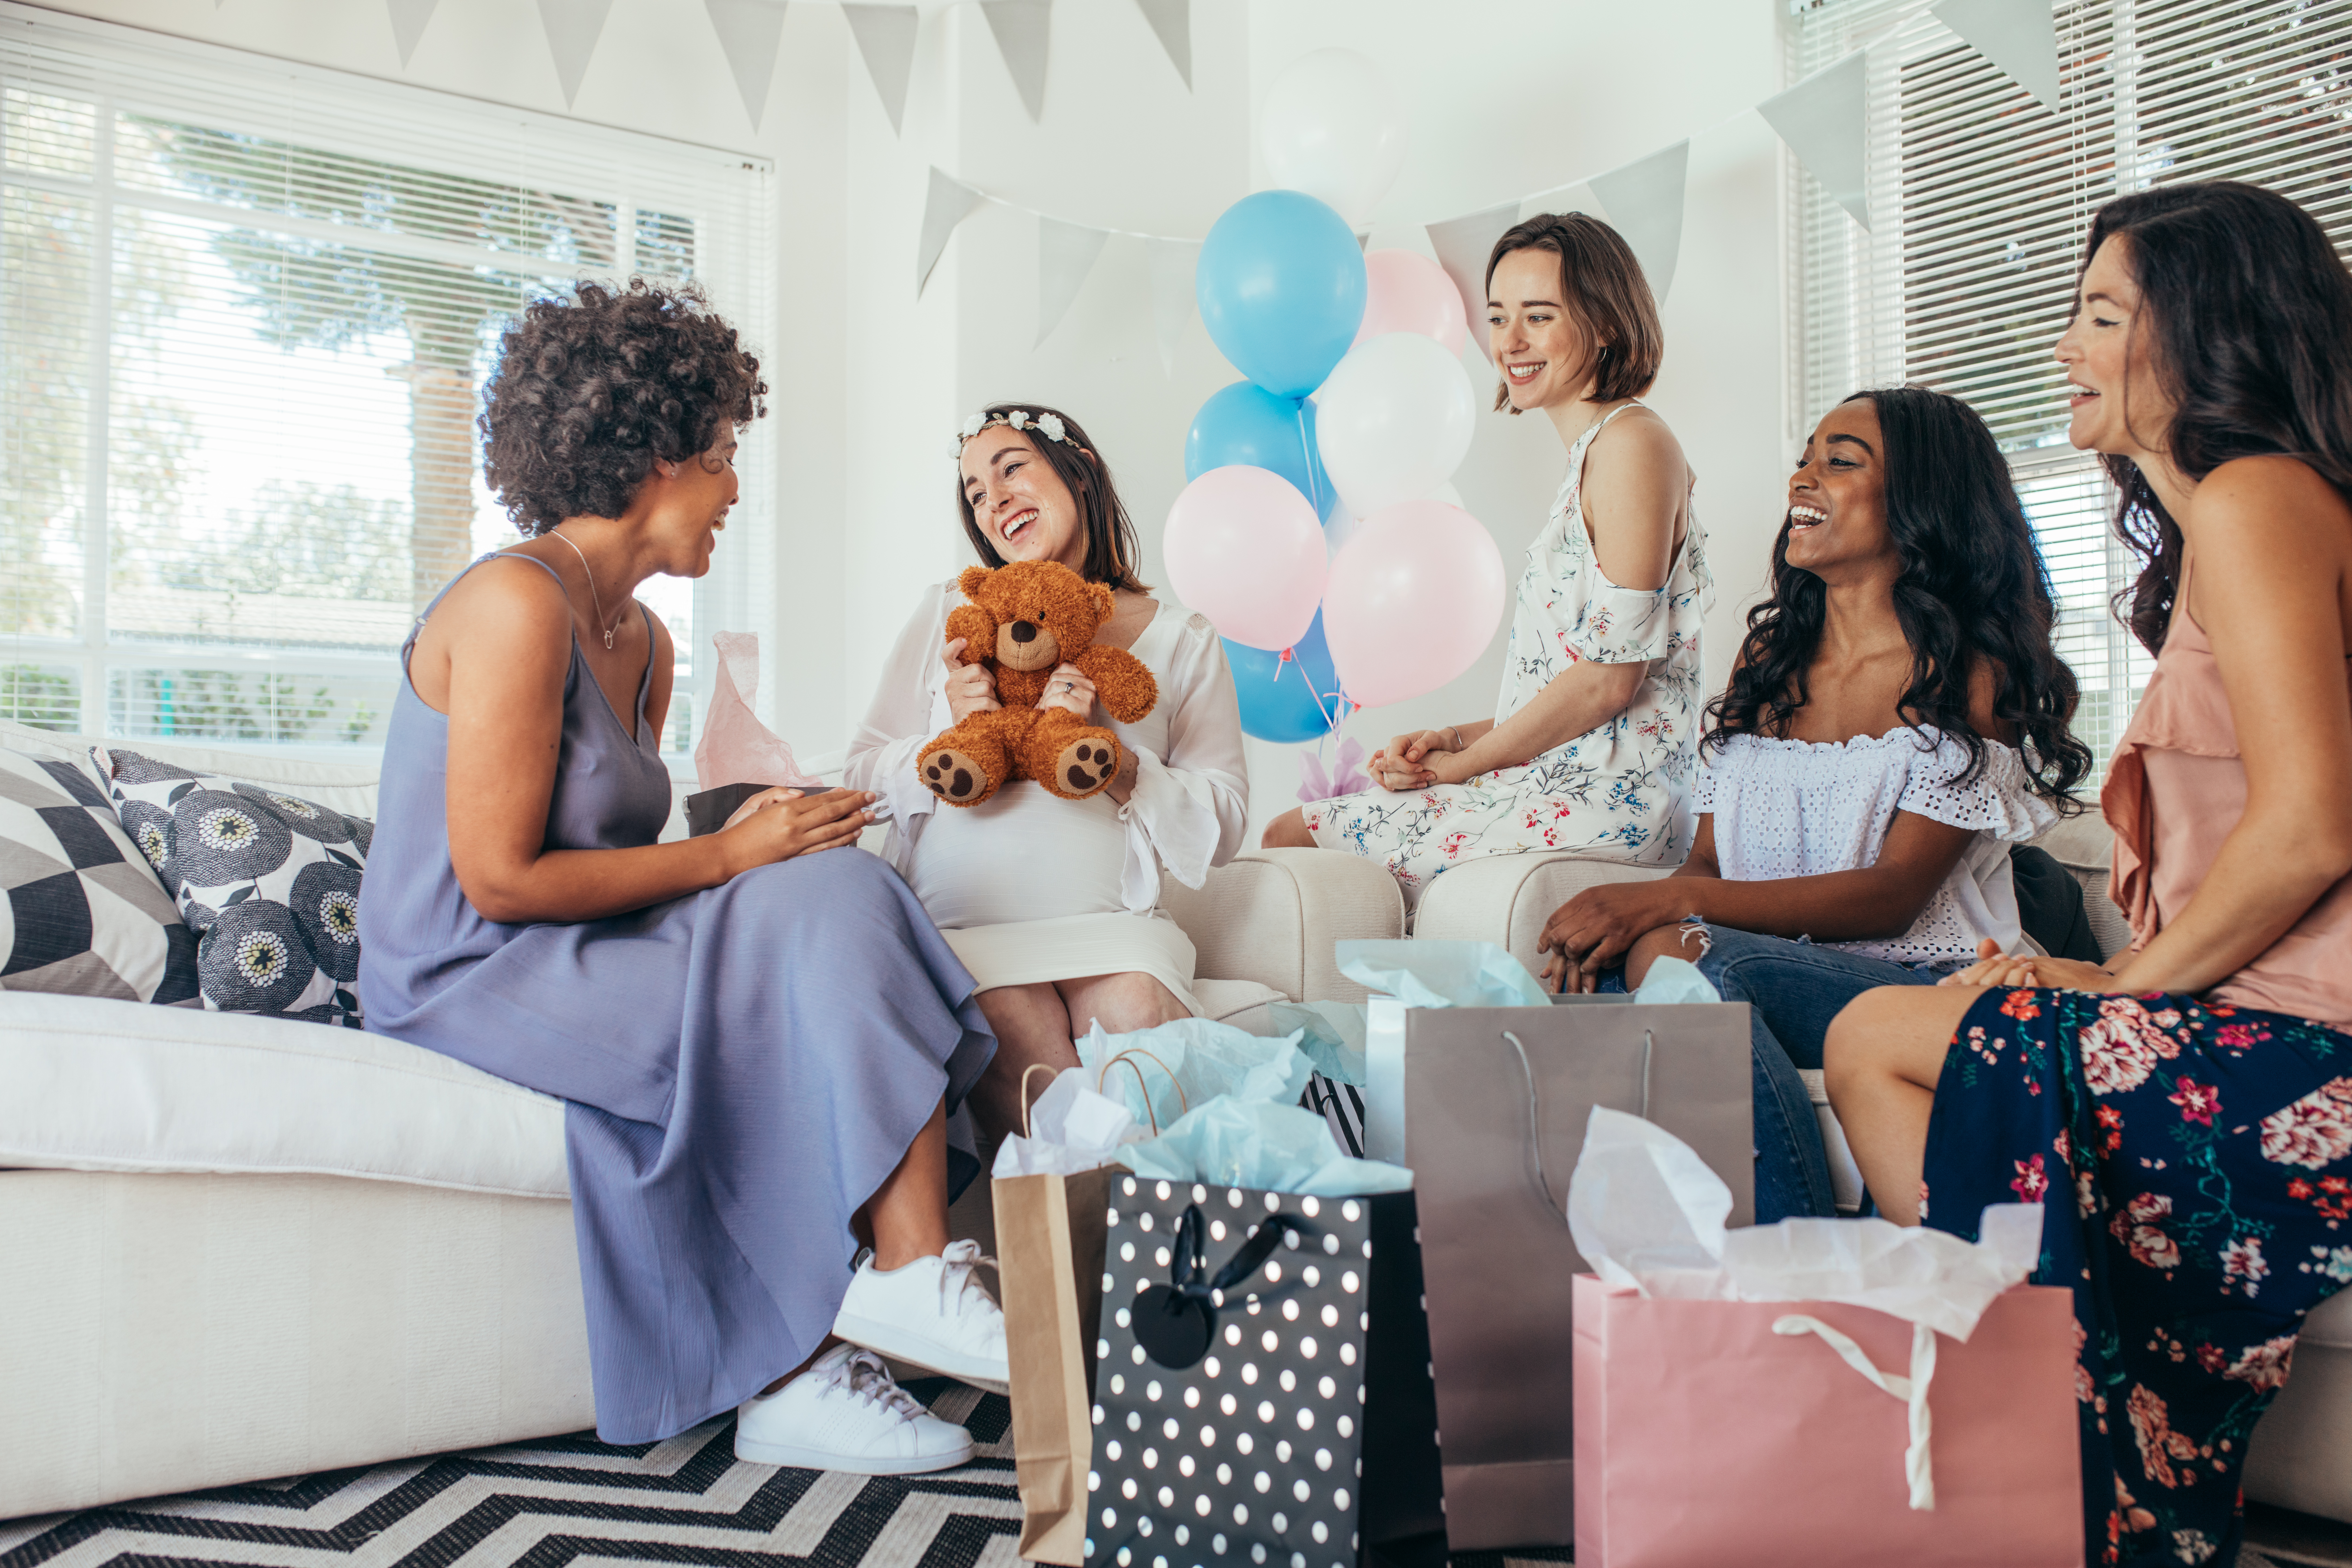 Women at a baby shower with gifts